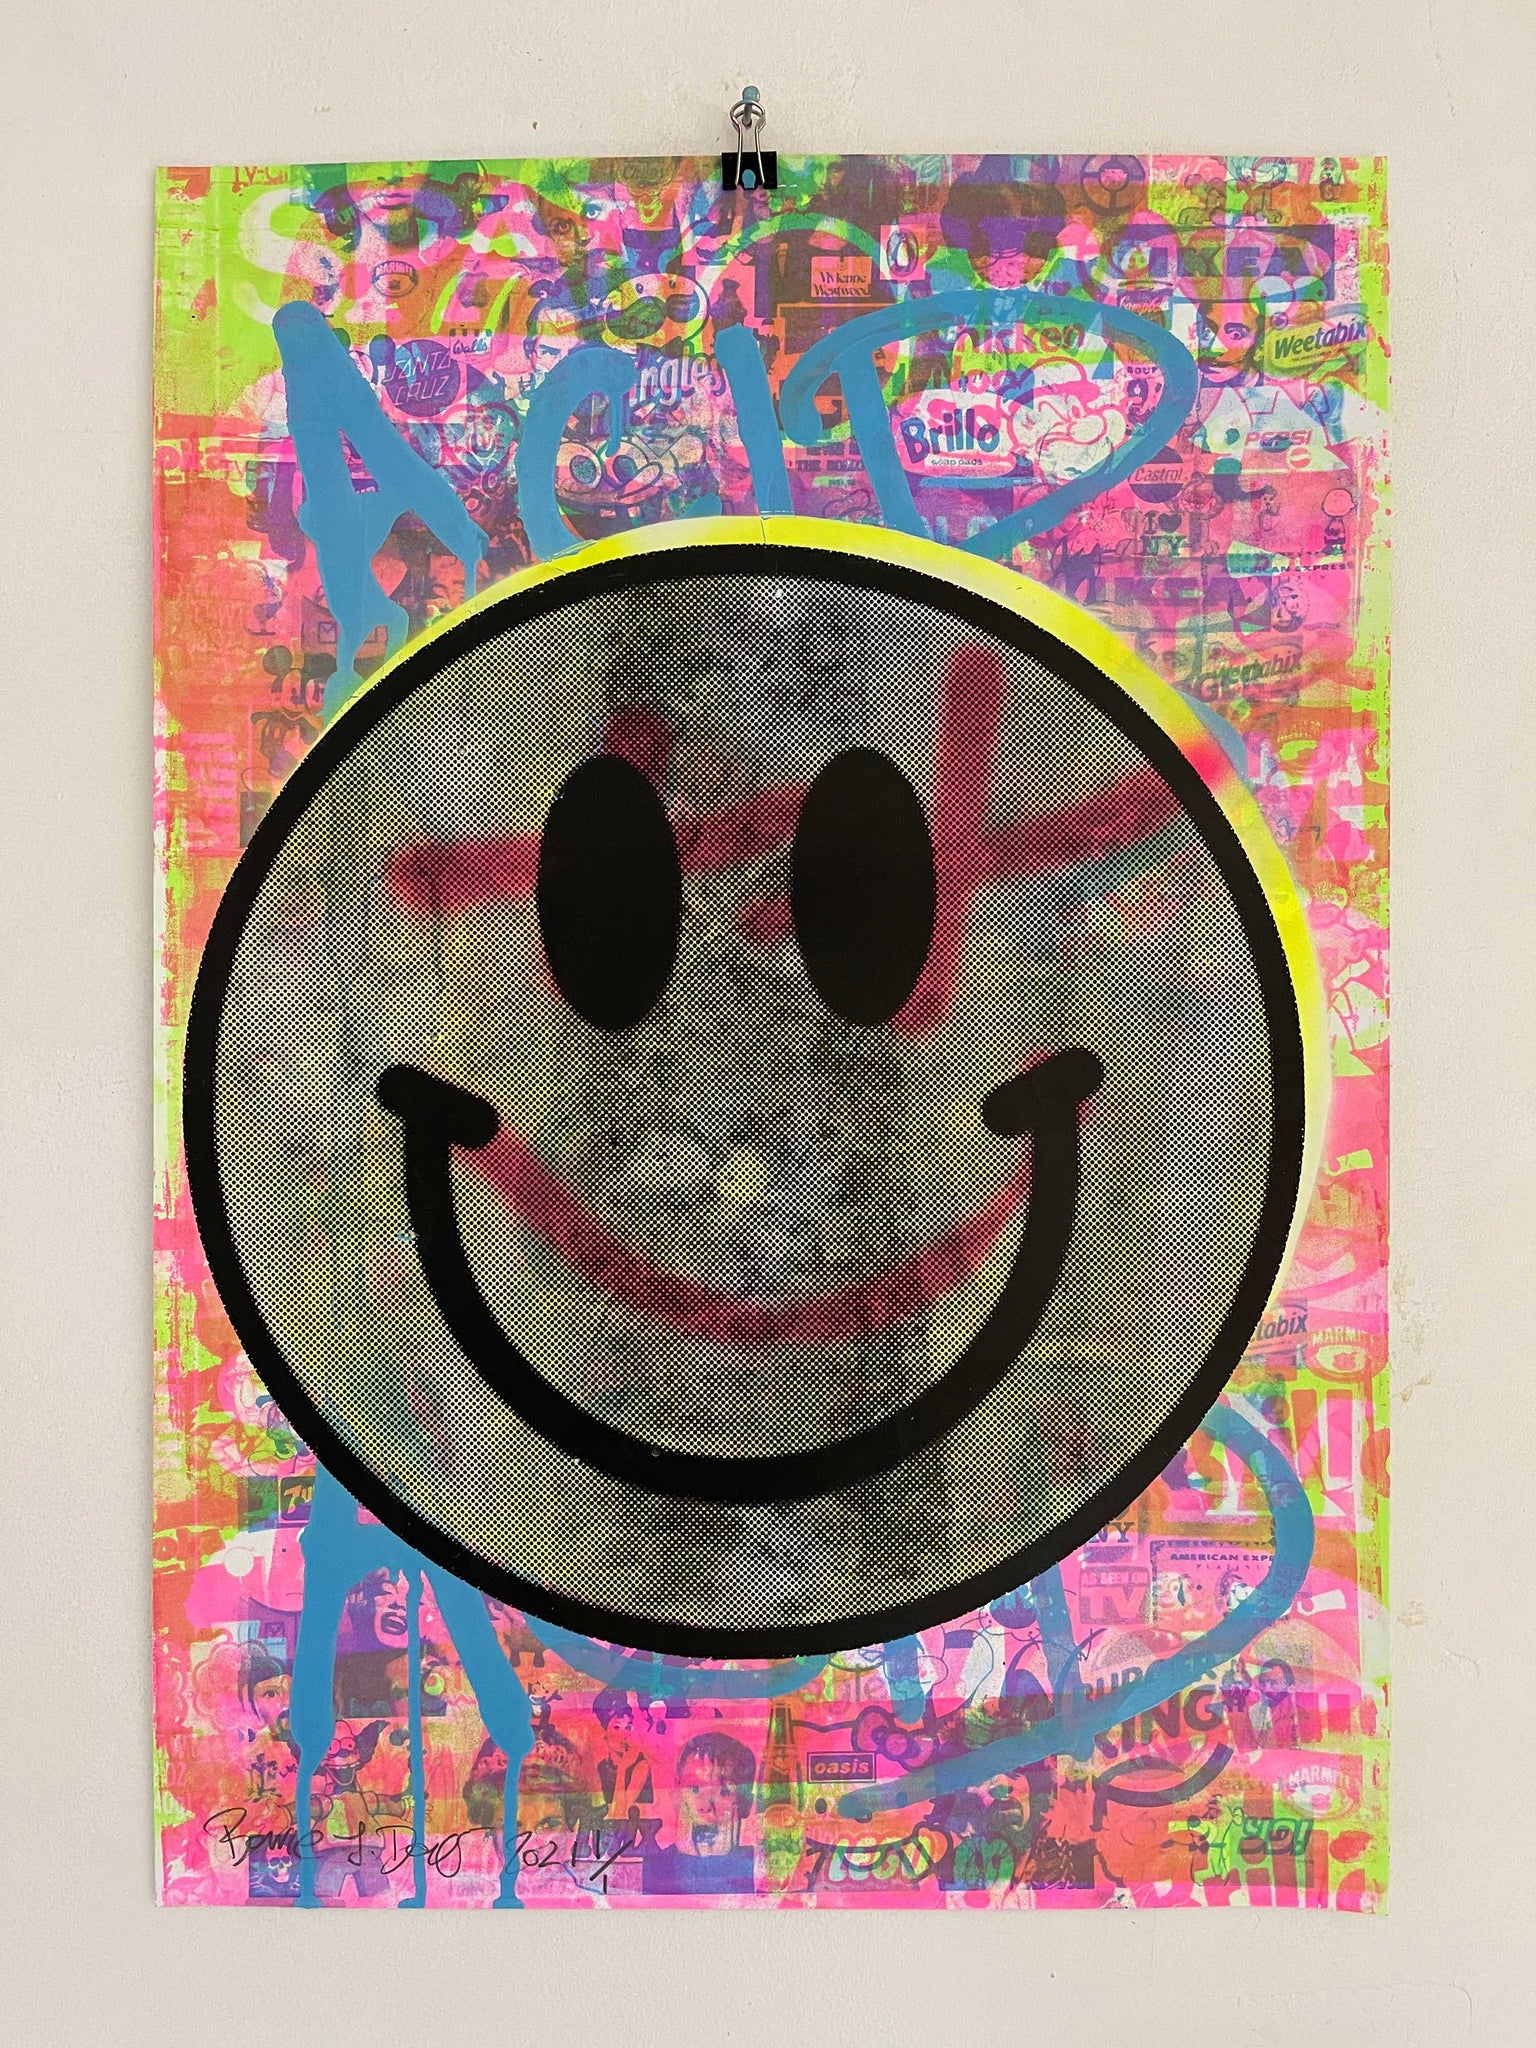 Crazy Happy Now Print, unframed Silkscreen print on paper (hand finished) edition of 1/1 - A2 size 42cm x 59.4cm. Buy online with free delivery worldwide.